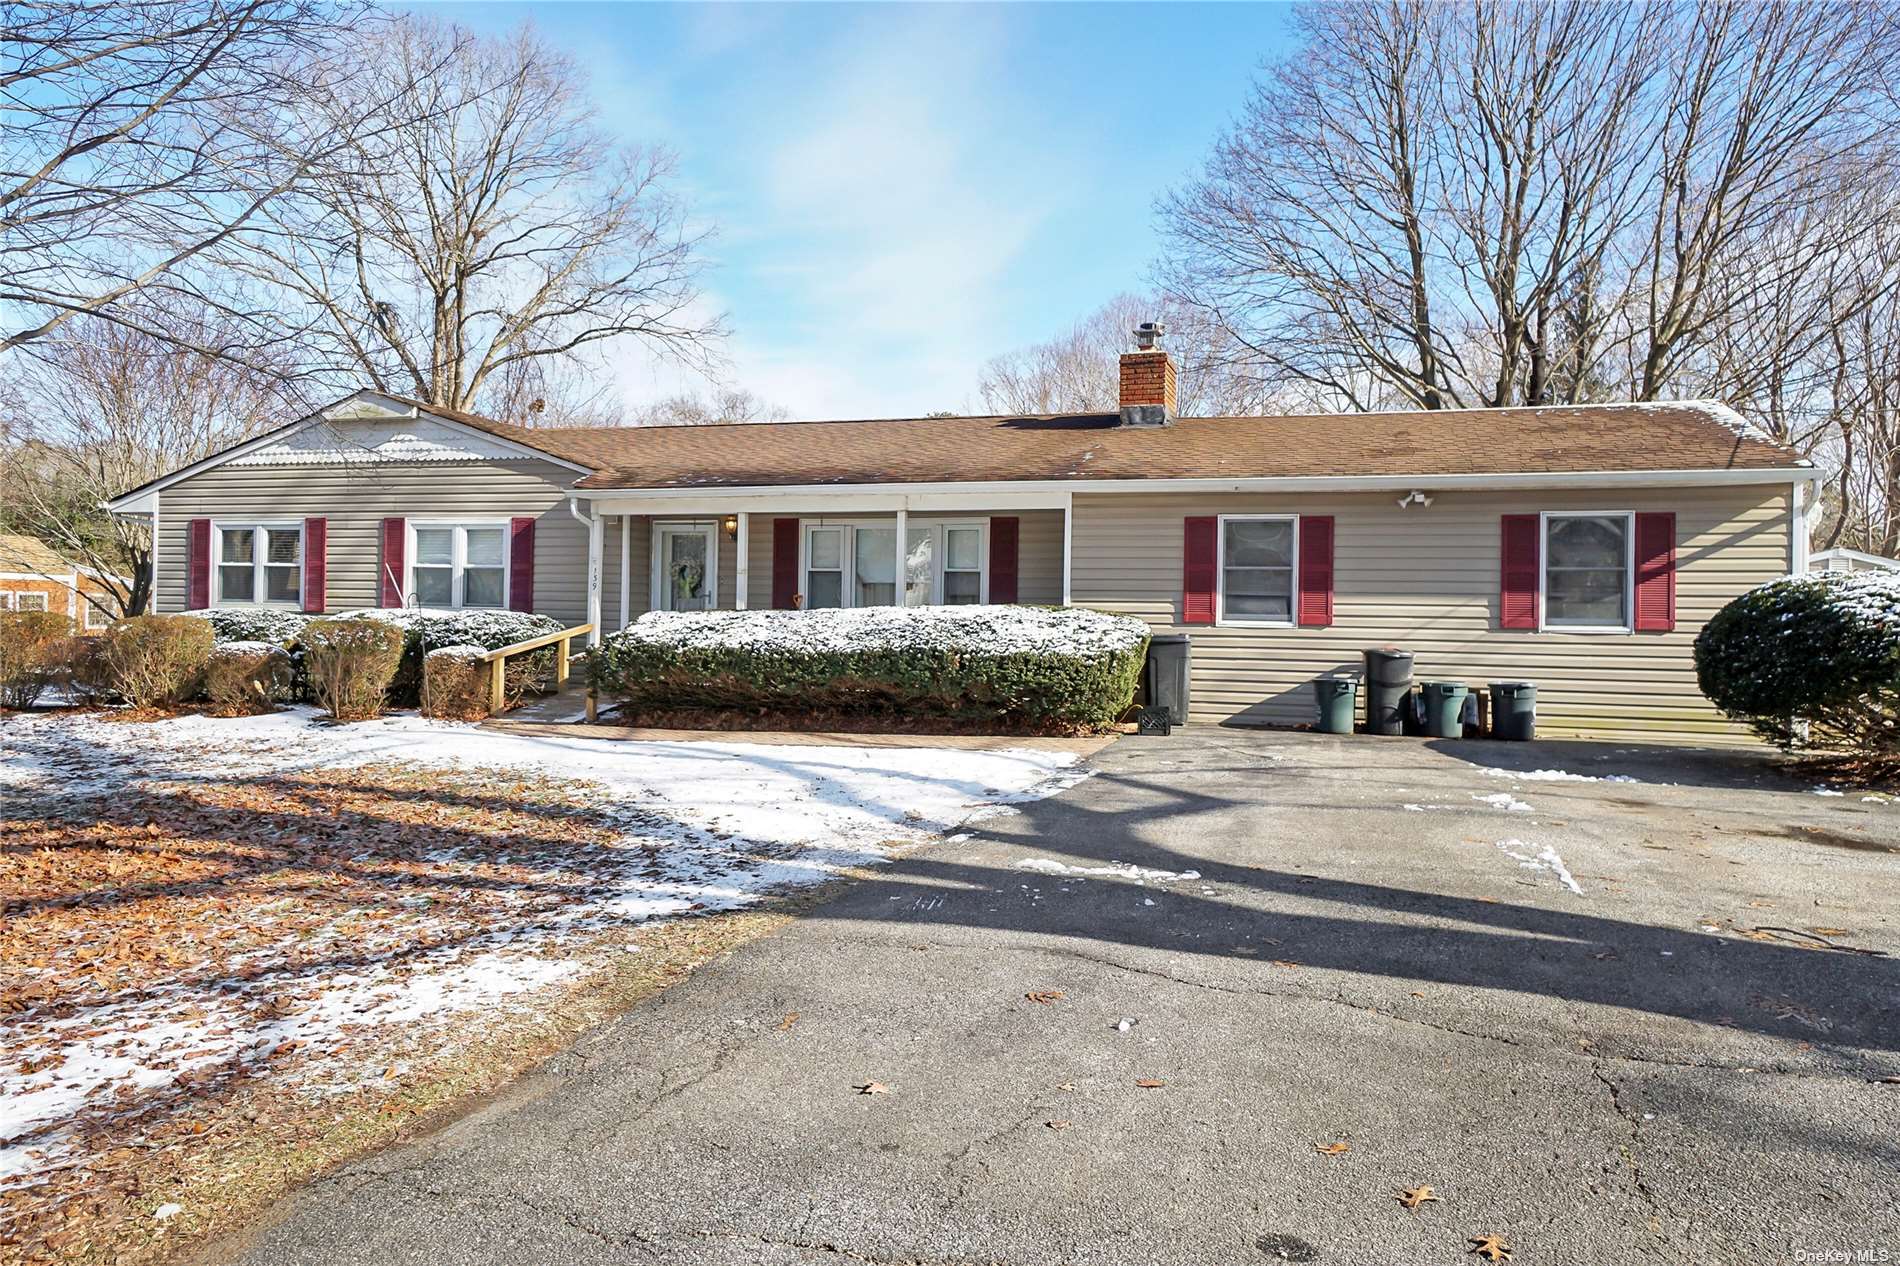 Listing in Mount Sinai, NY